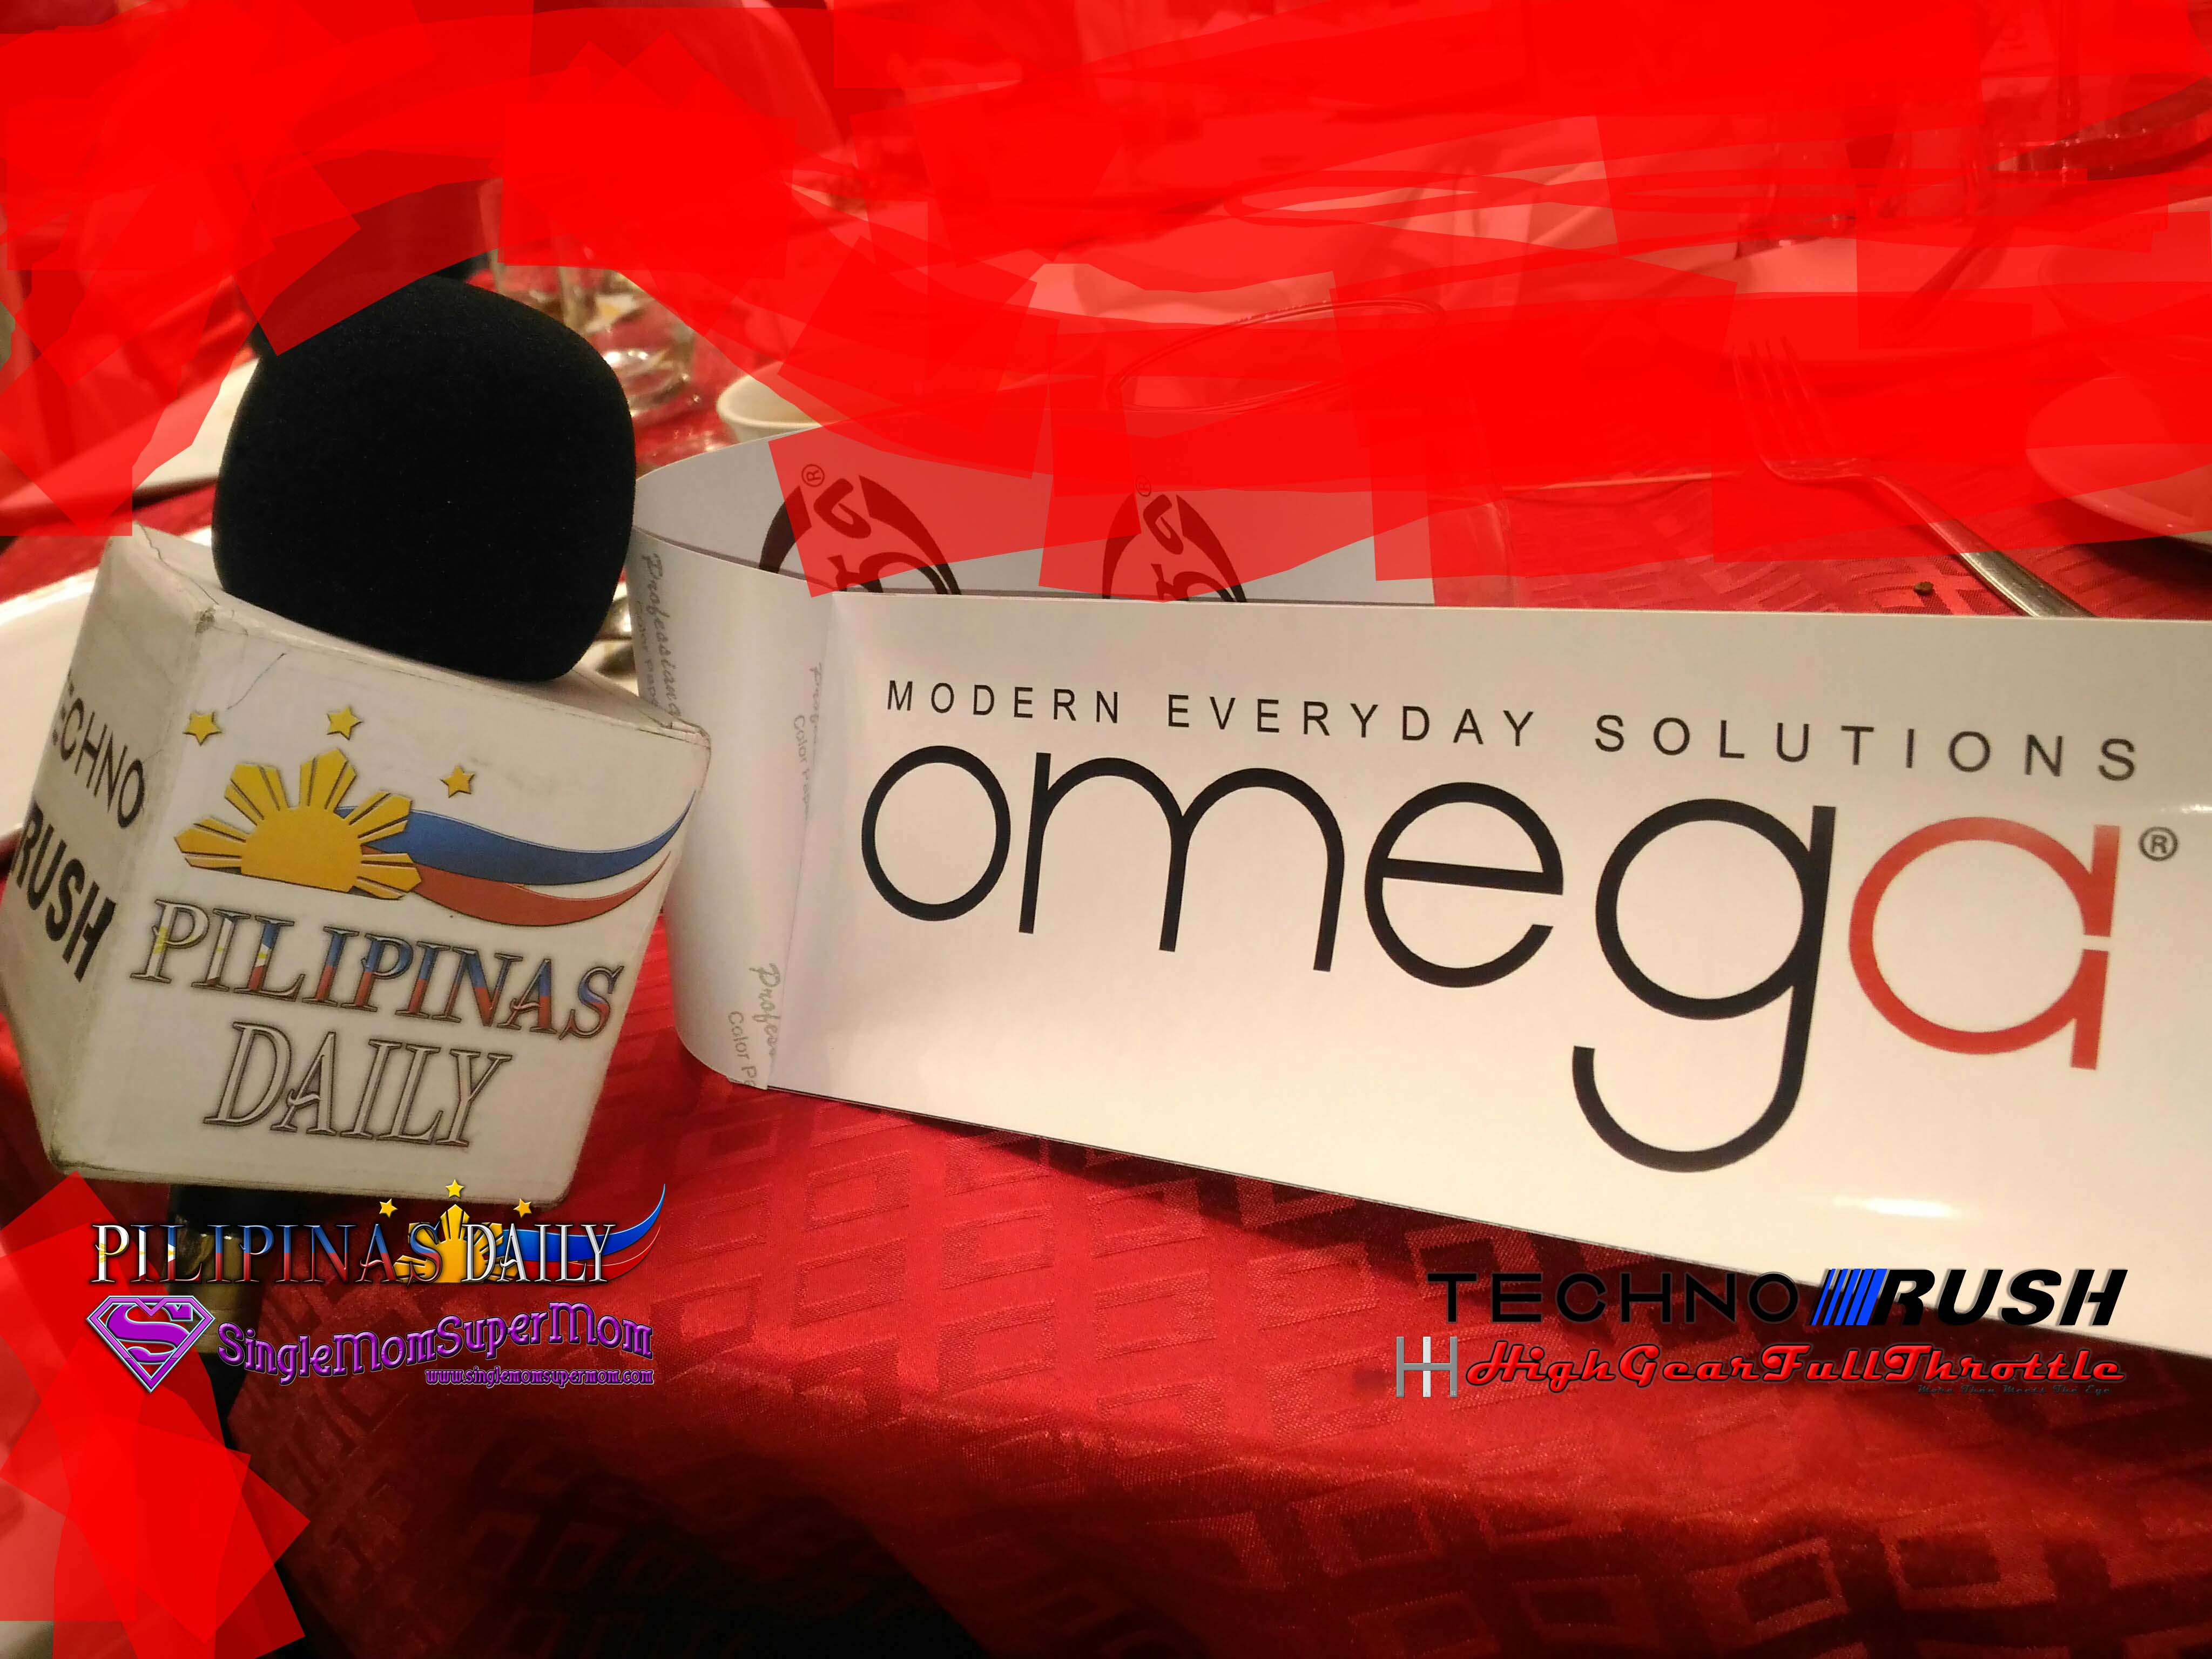 Omega Houseware with Pilipinas Daily